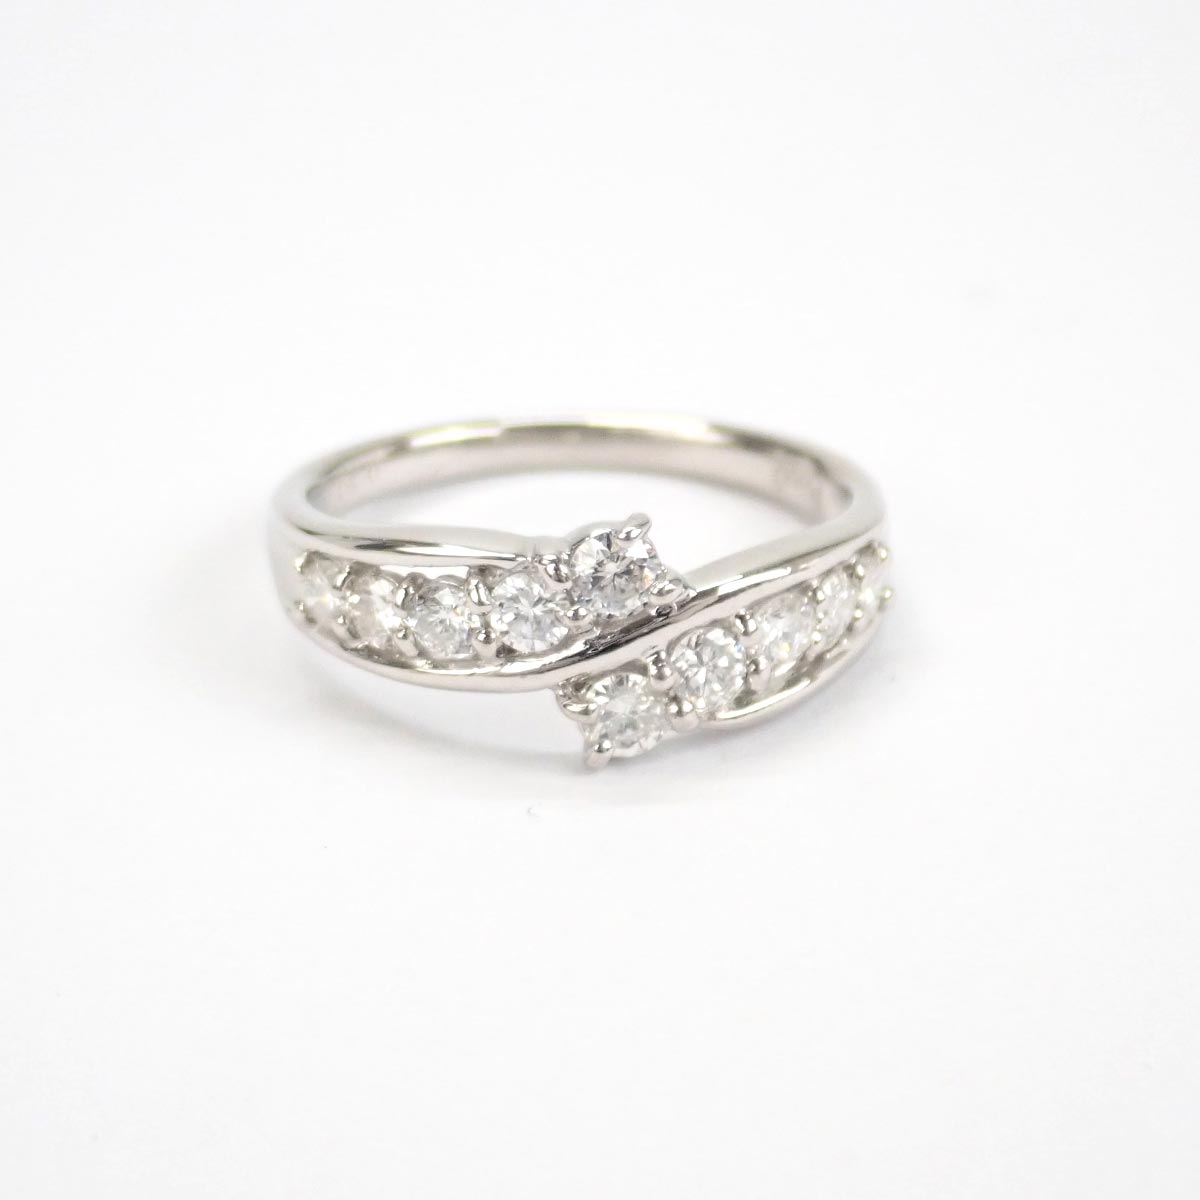 Chic D0.50ct, Gauge 11 Ring - Platinum PT900 with Diamond, 11 Silver For Women【Pre-Owned】